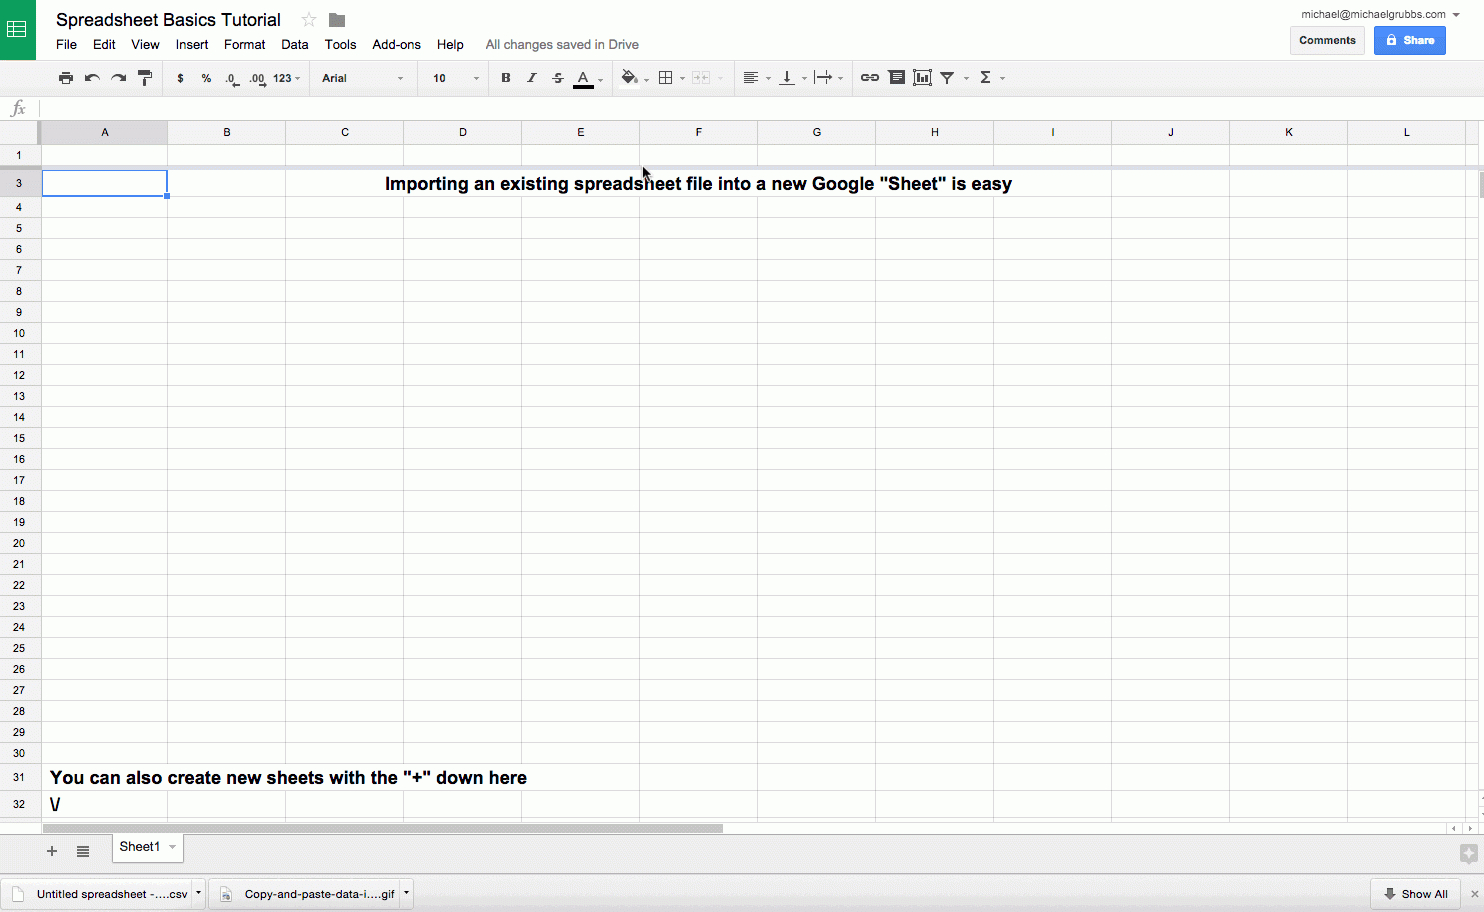 Jobs That Use Spreadsheets With Google Sheets 101: The Beginner's Guide To Online Spreadsheets  The